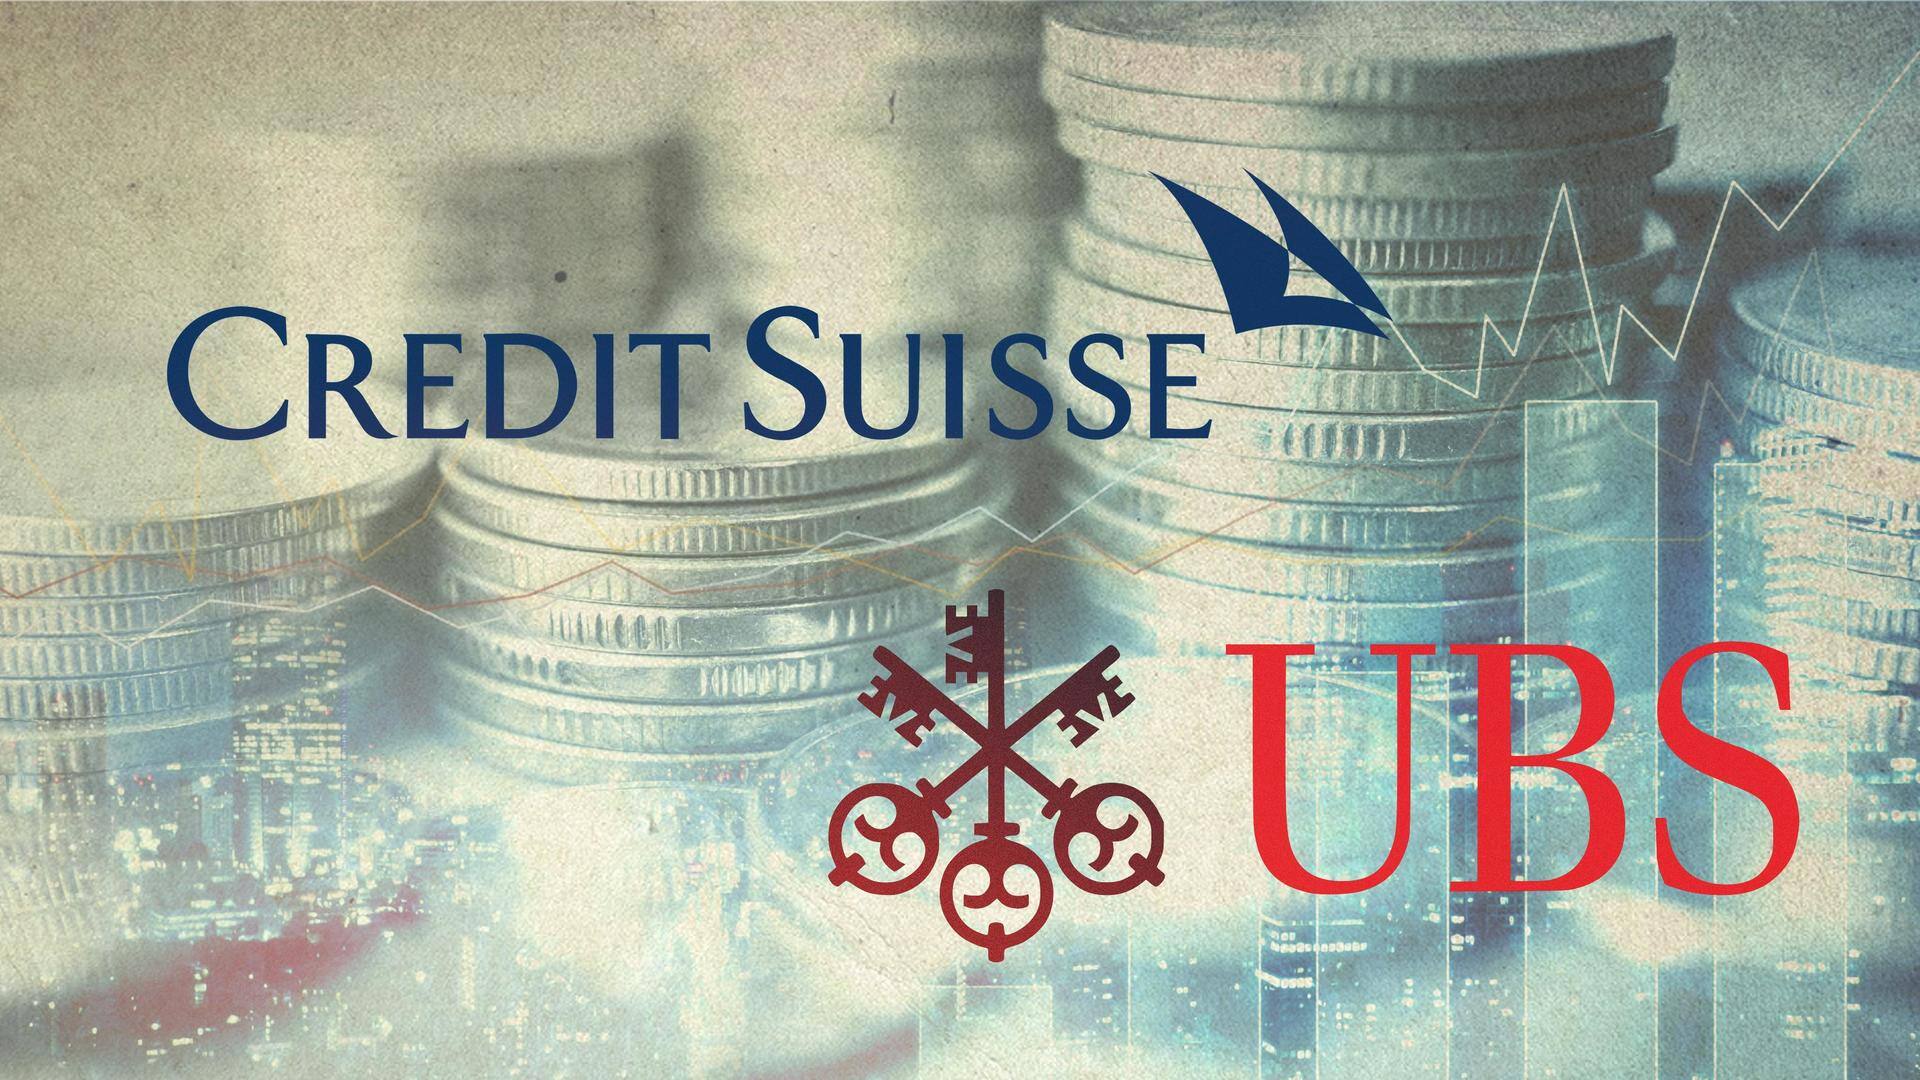 Why UBS agreed to acquire its rival Credit Suisse